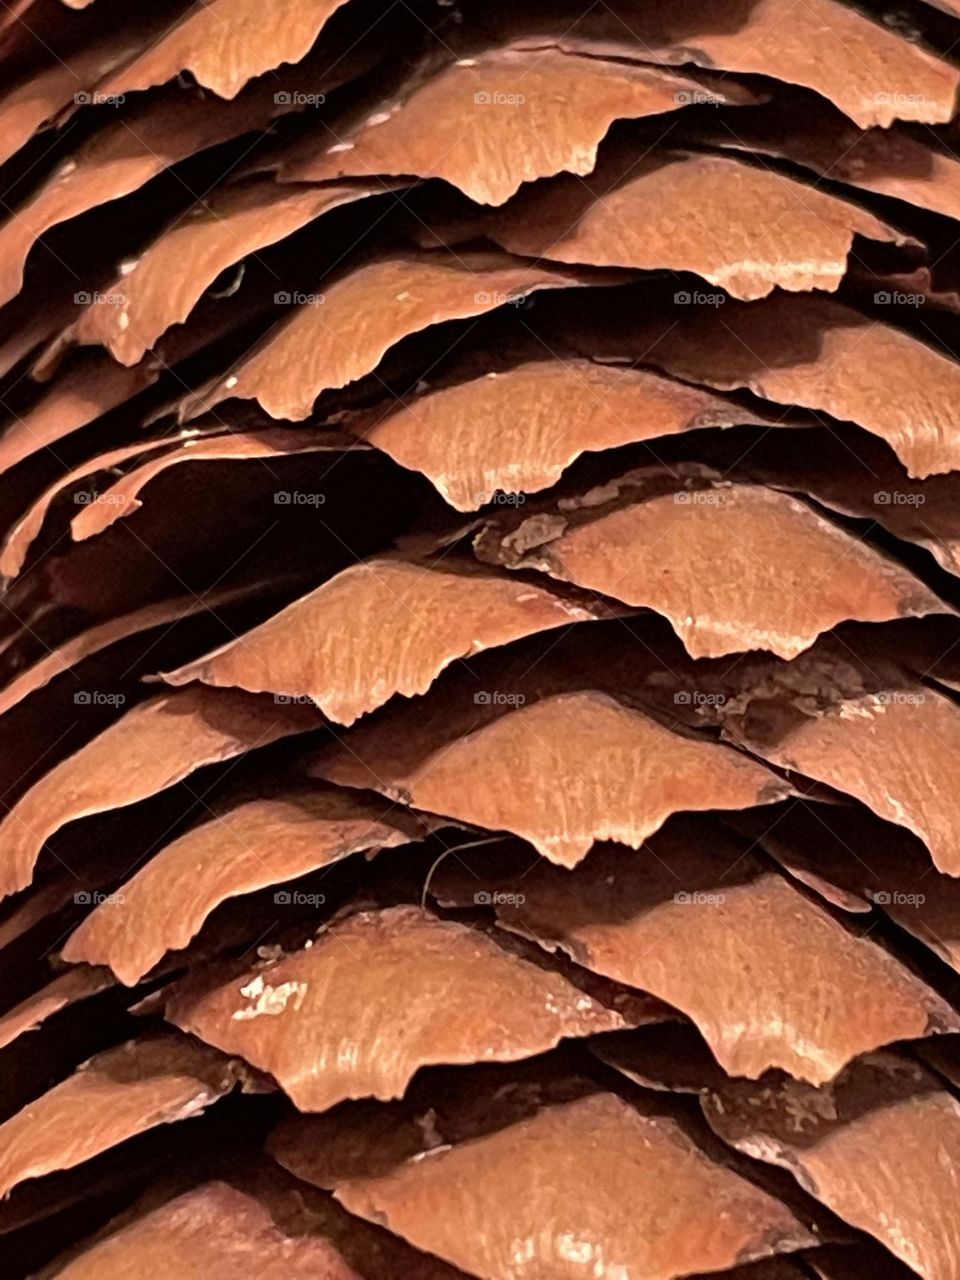 Upclose layers of a pine cone. 